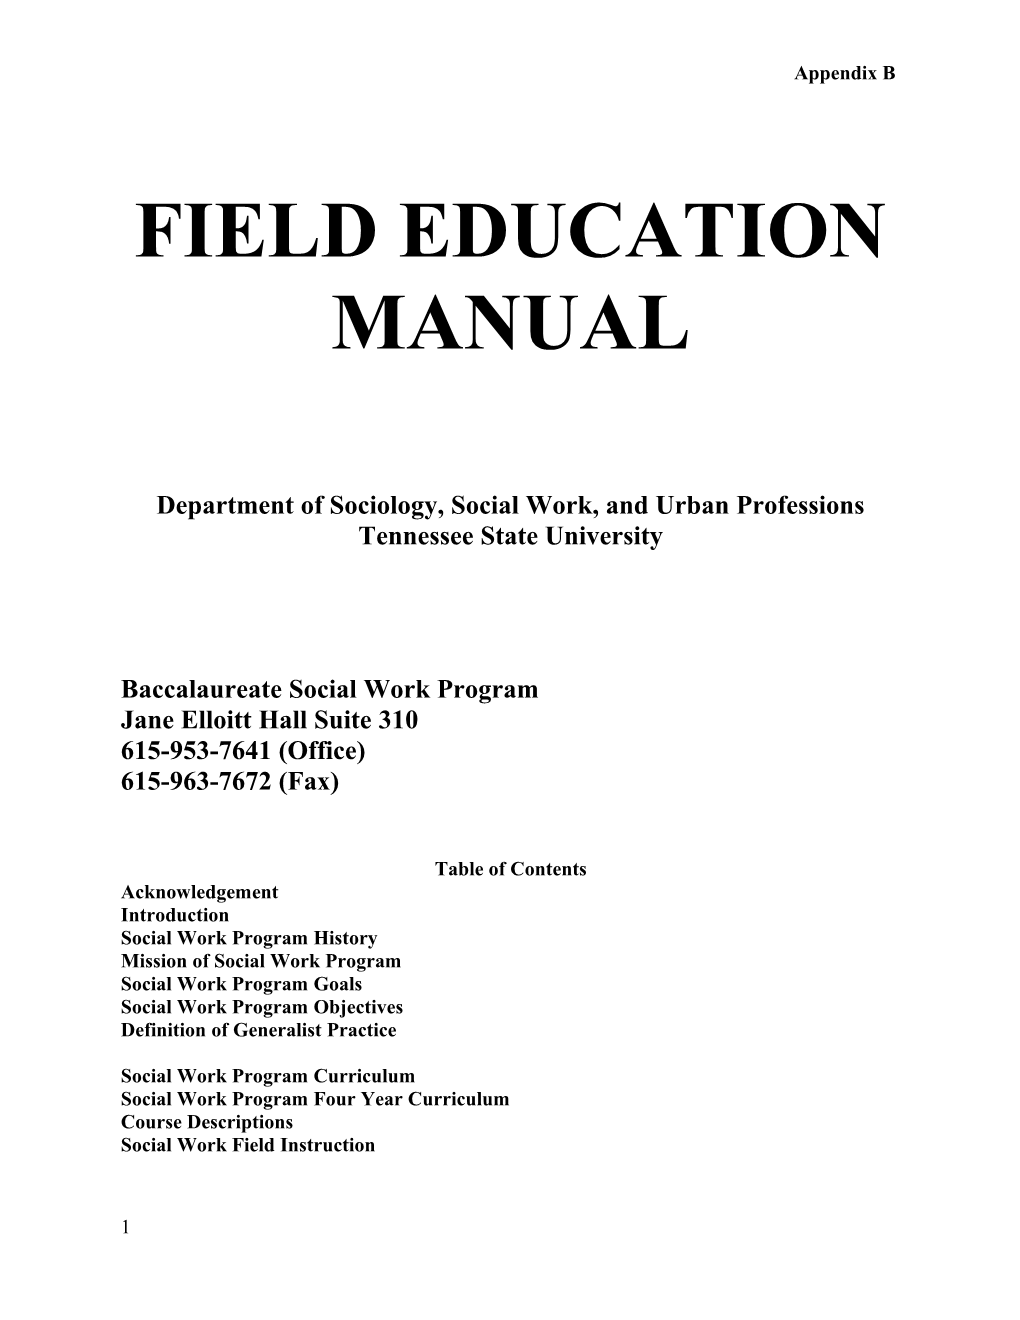 Department of Sociology, Social Work, and Urban Professions